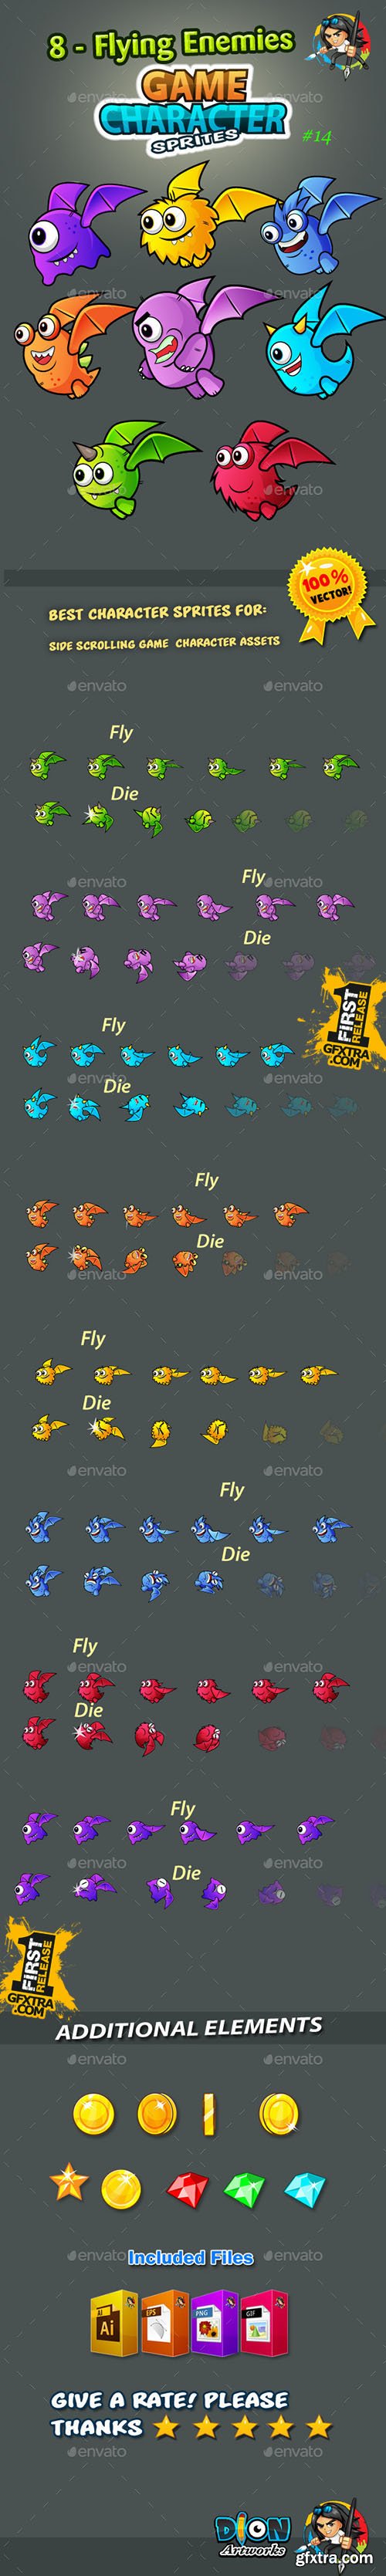 GraphicRiver 8 Flying Monster Enemies Character Sprites